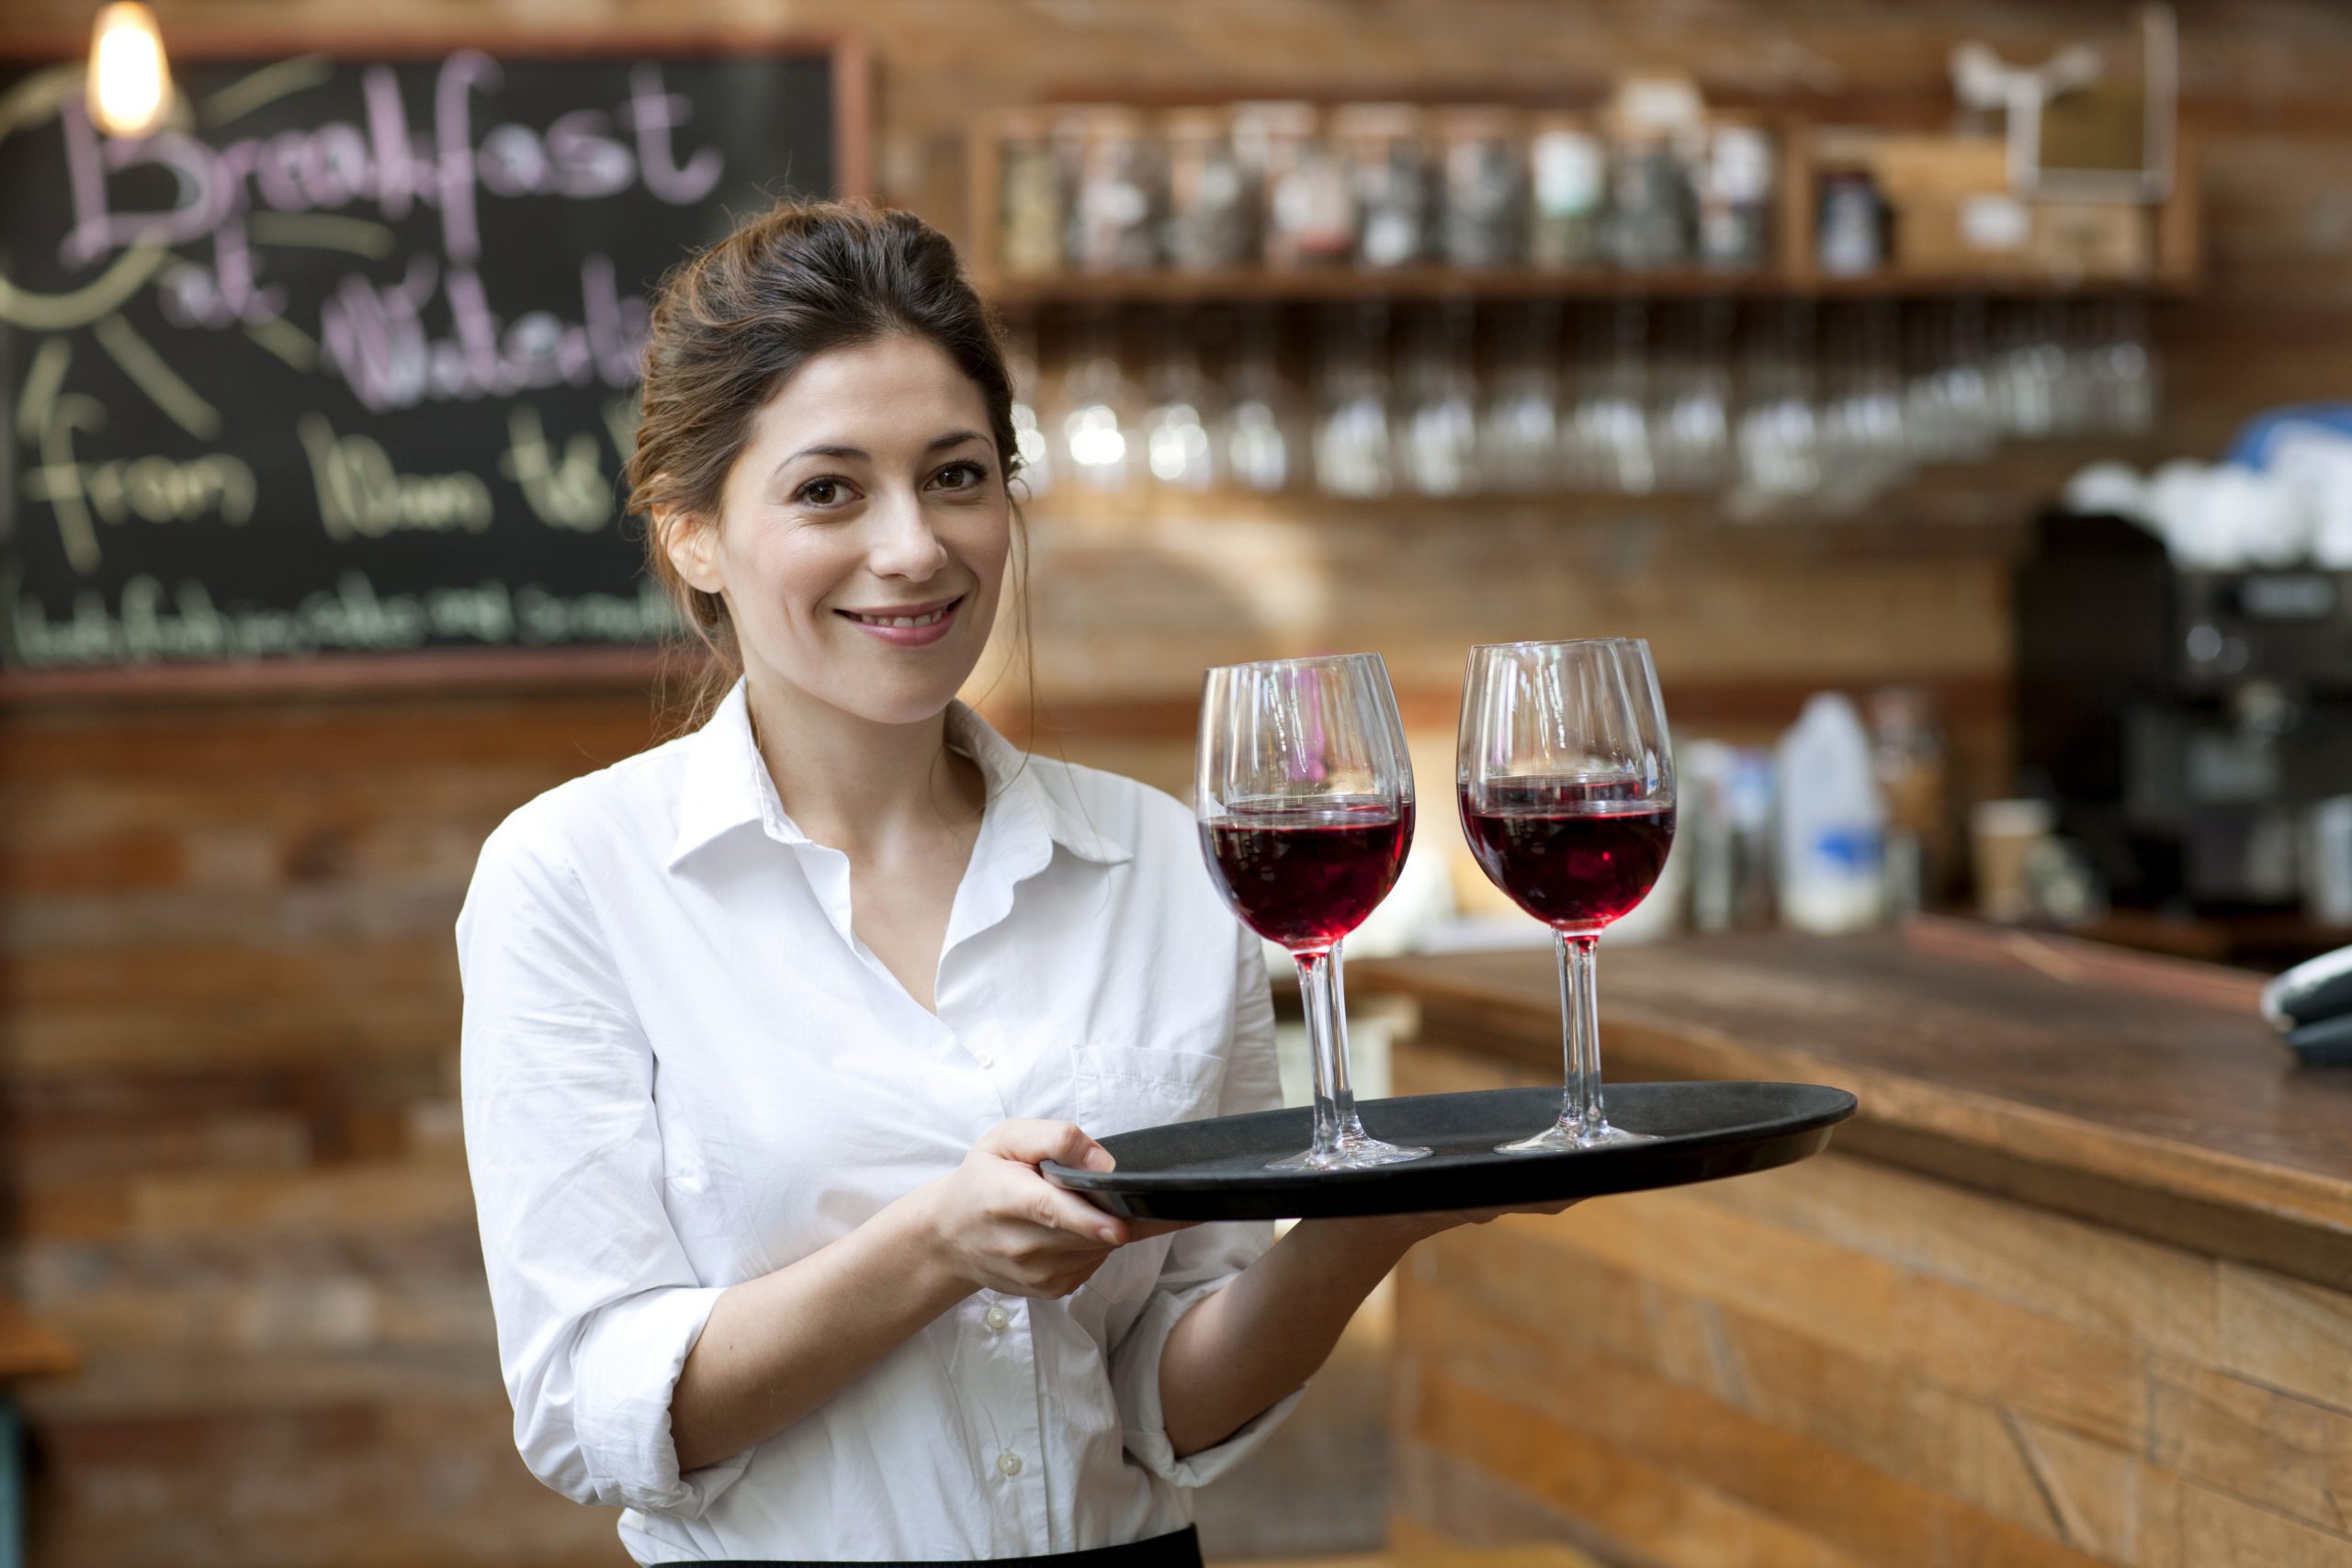 A woman gracefully holds two glasses of red wine, showcasing elegance and sophistication.